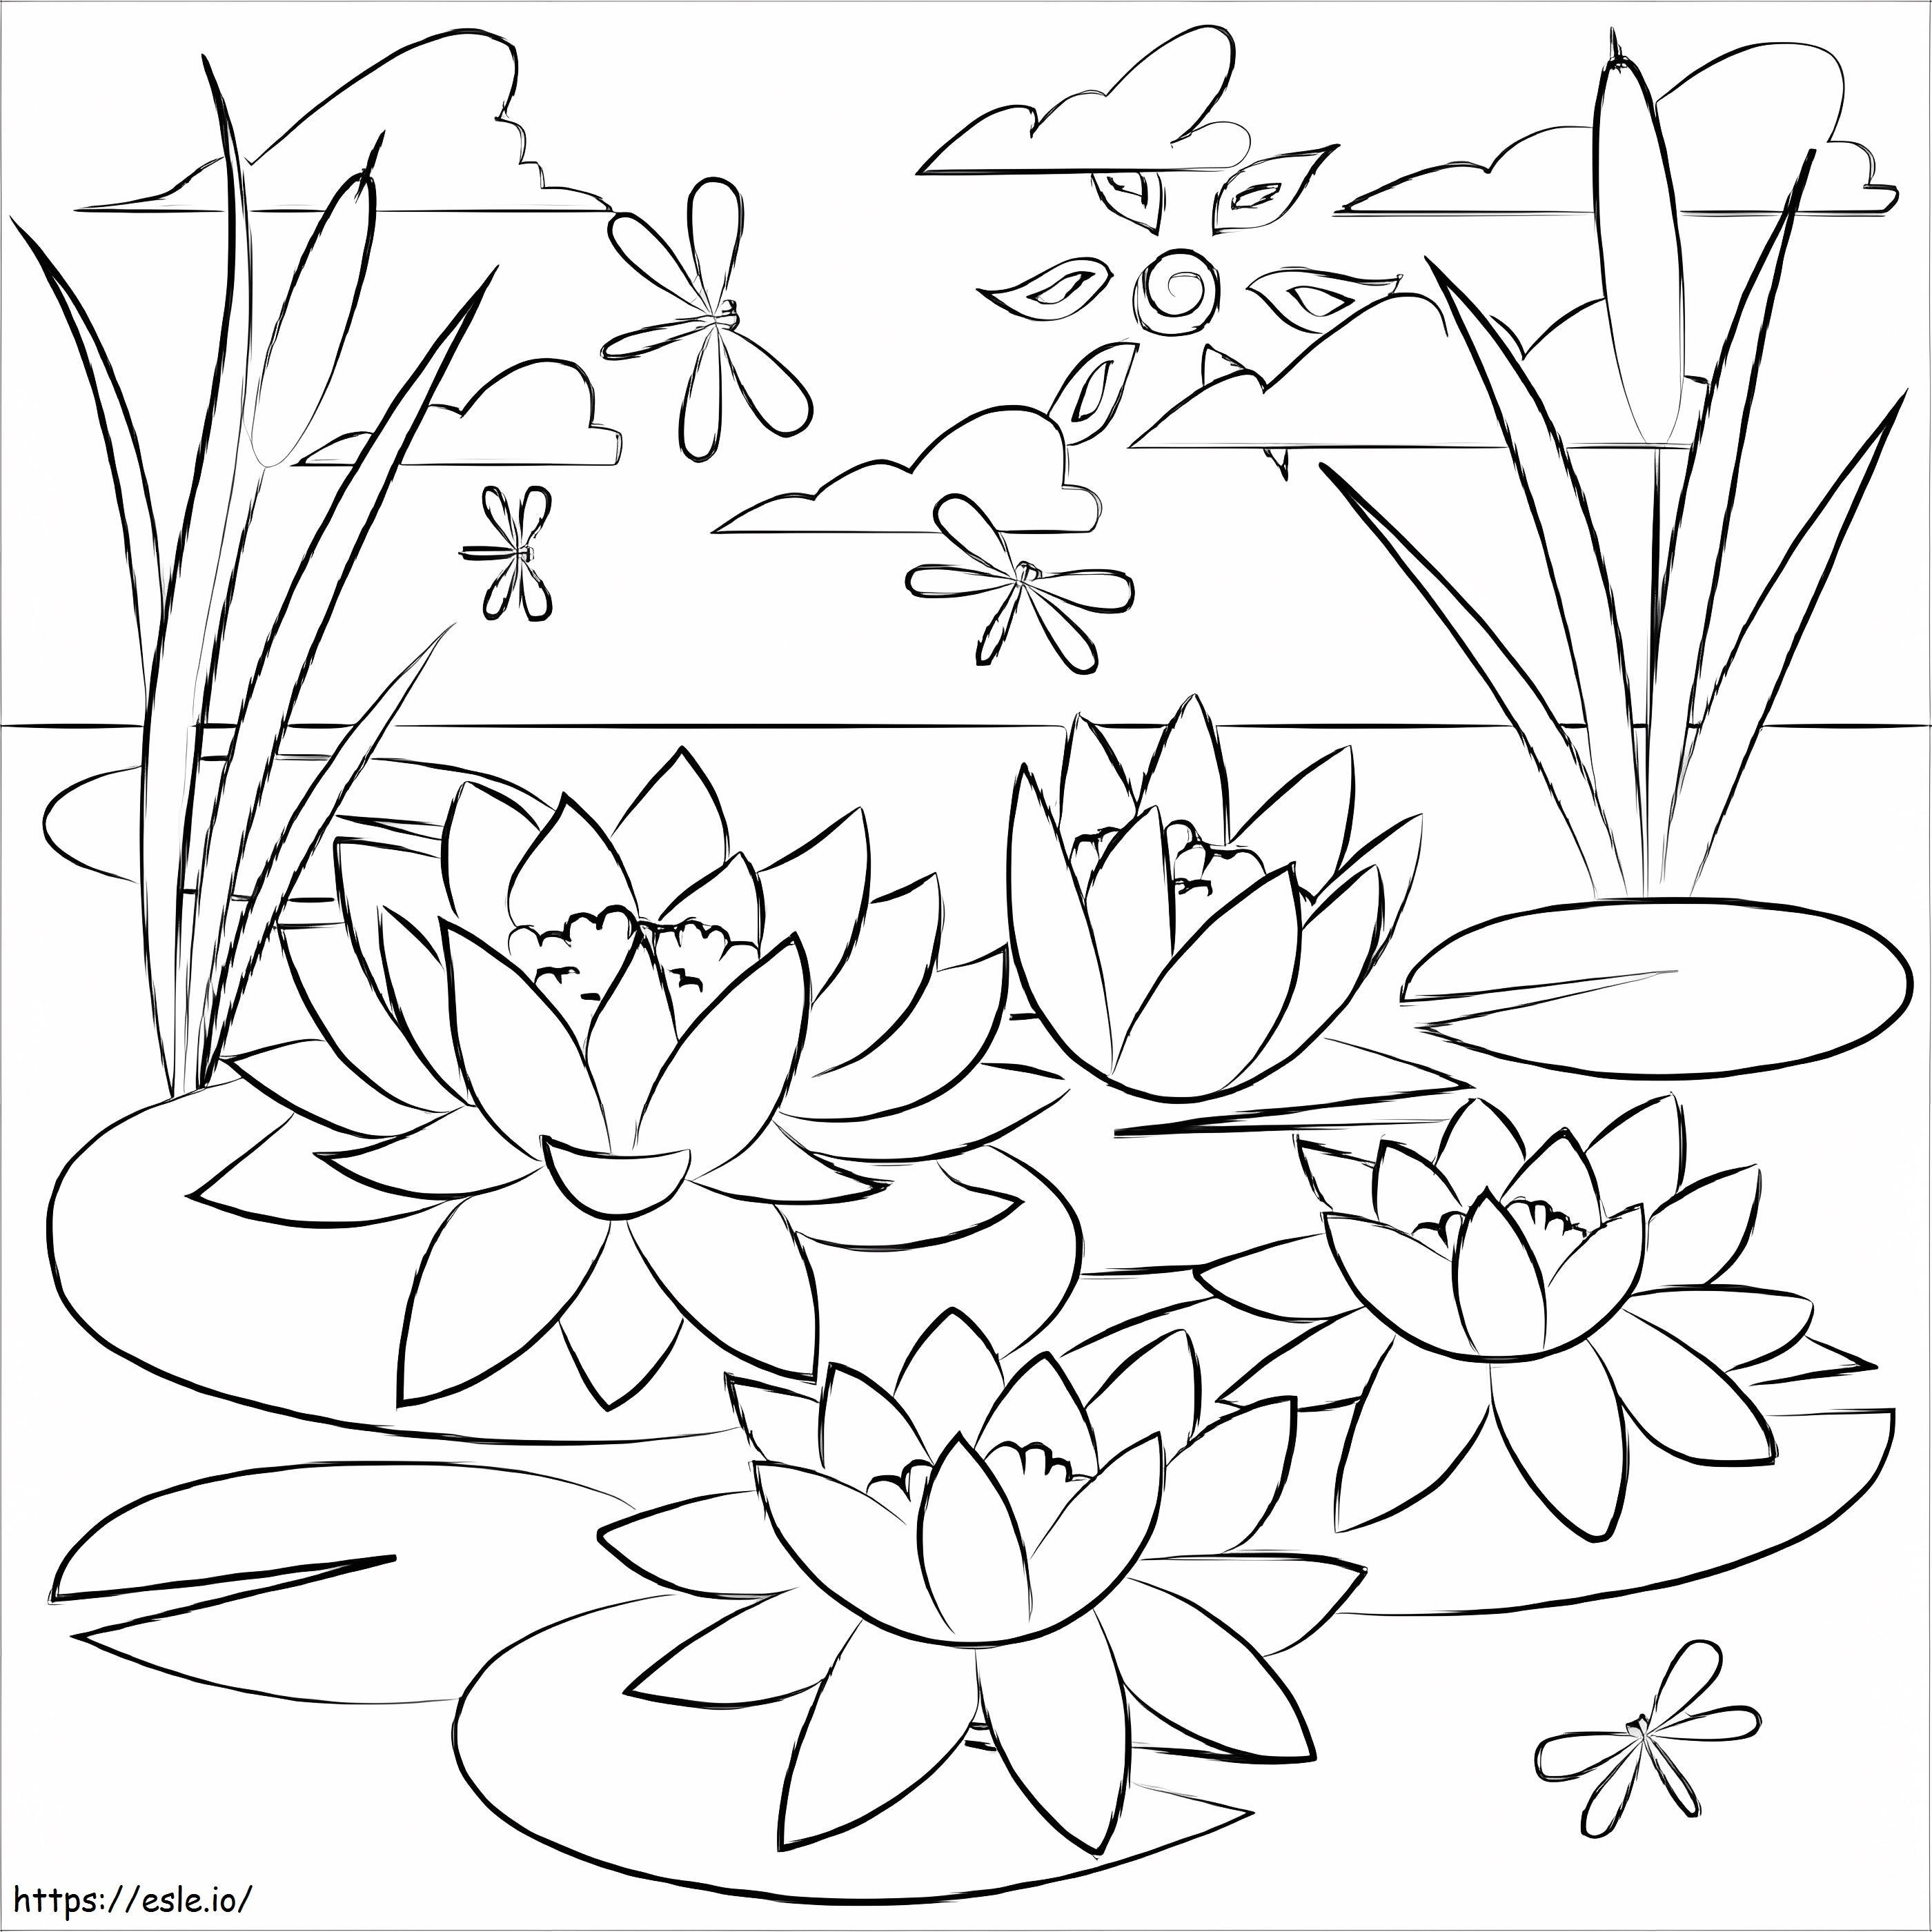 Dragonfly And Lily Pad coloring page